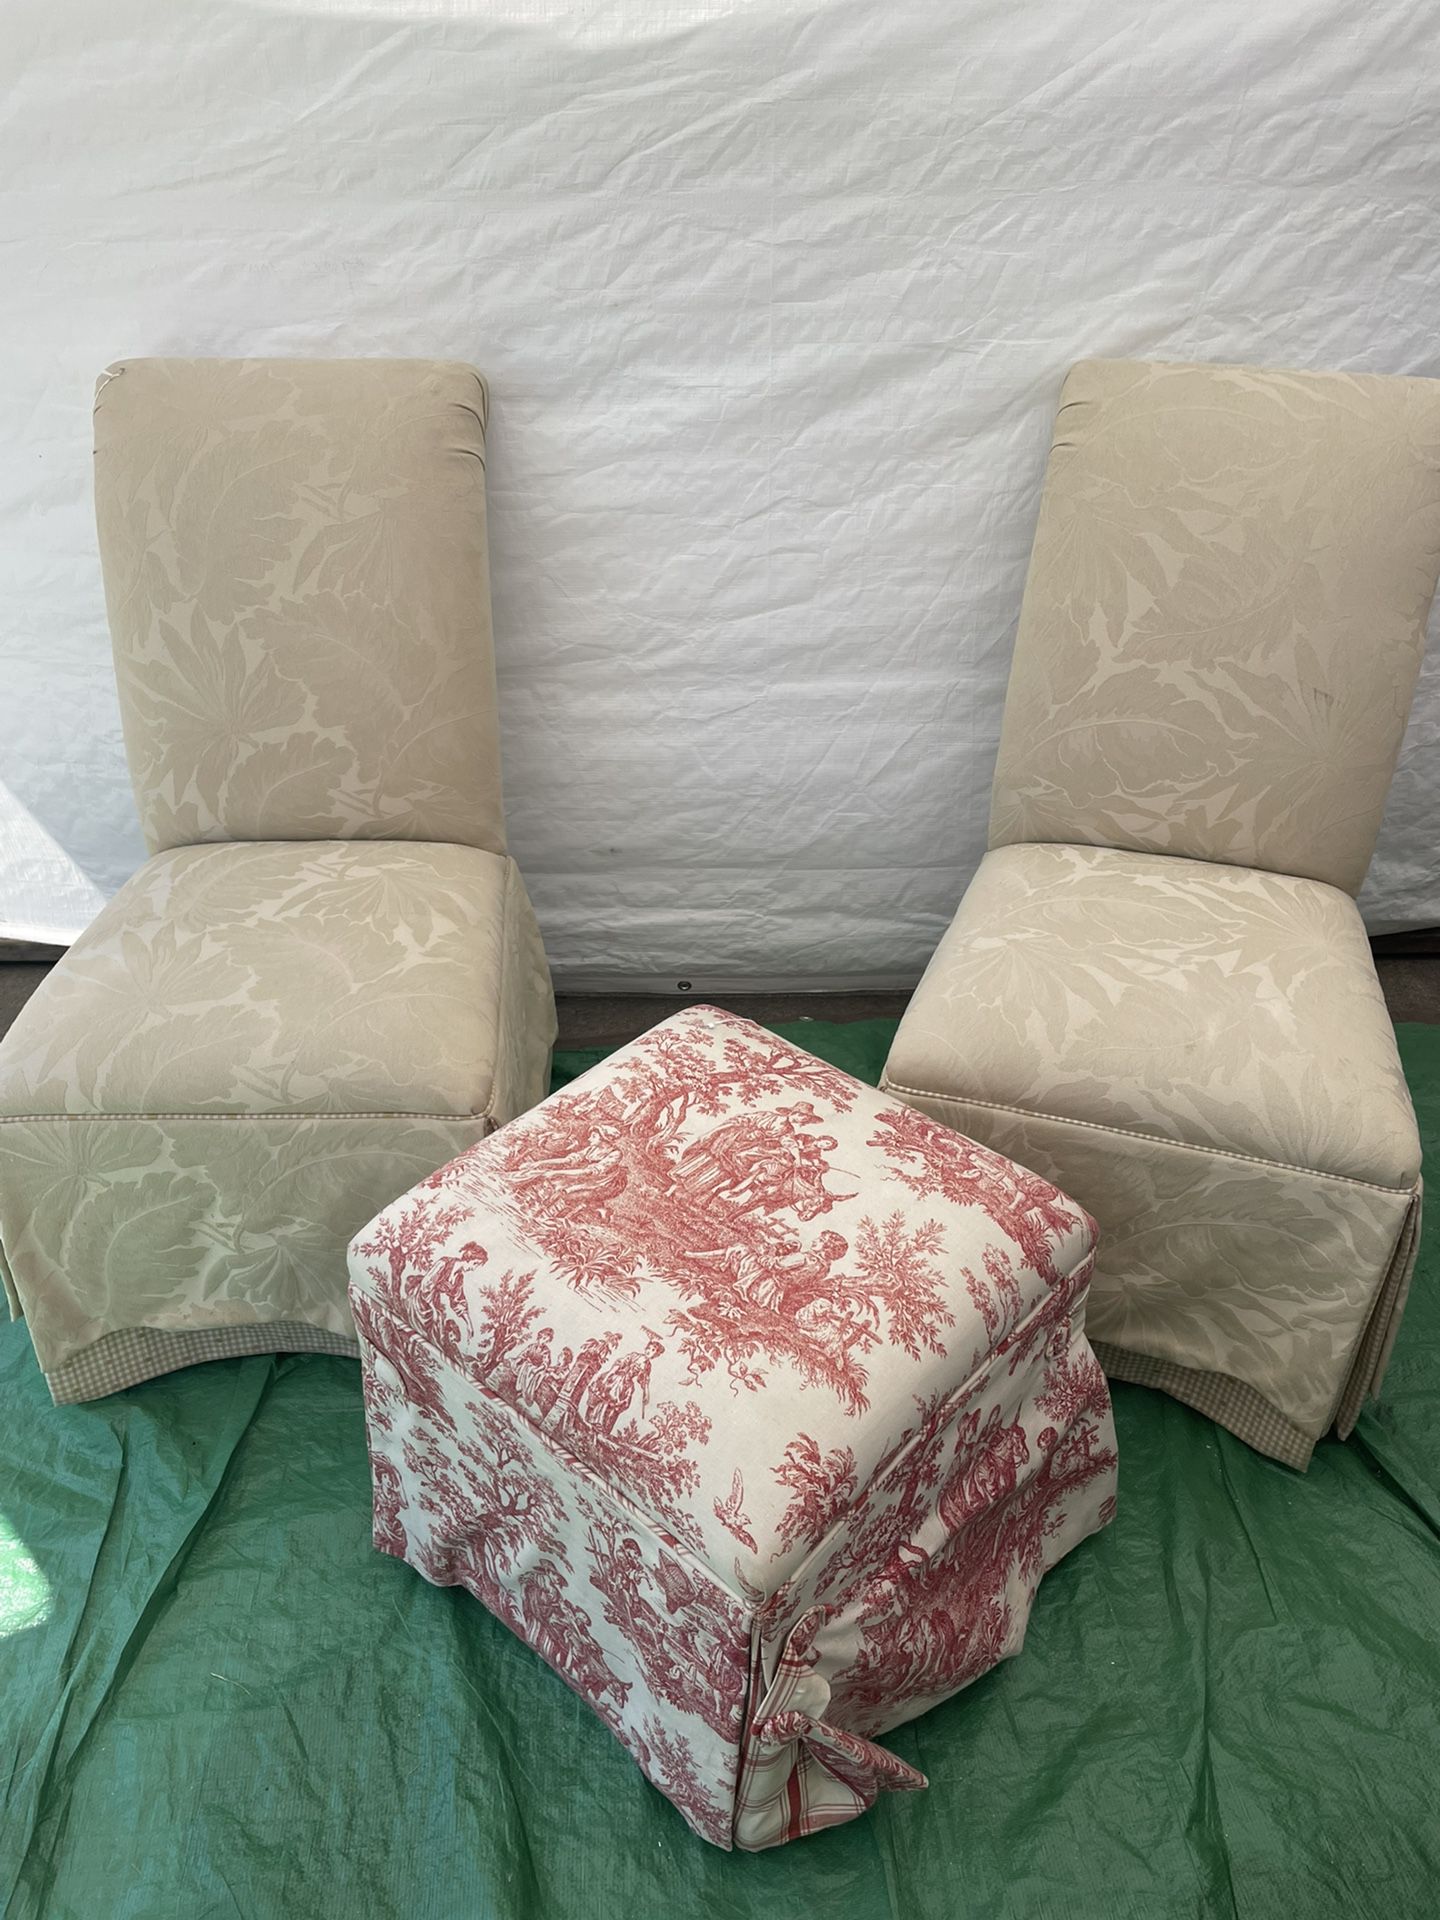 Soft rolling chairs and ottoman